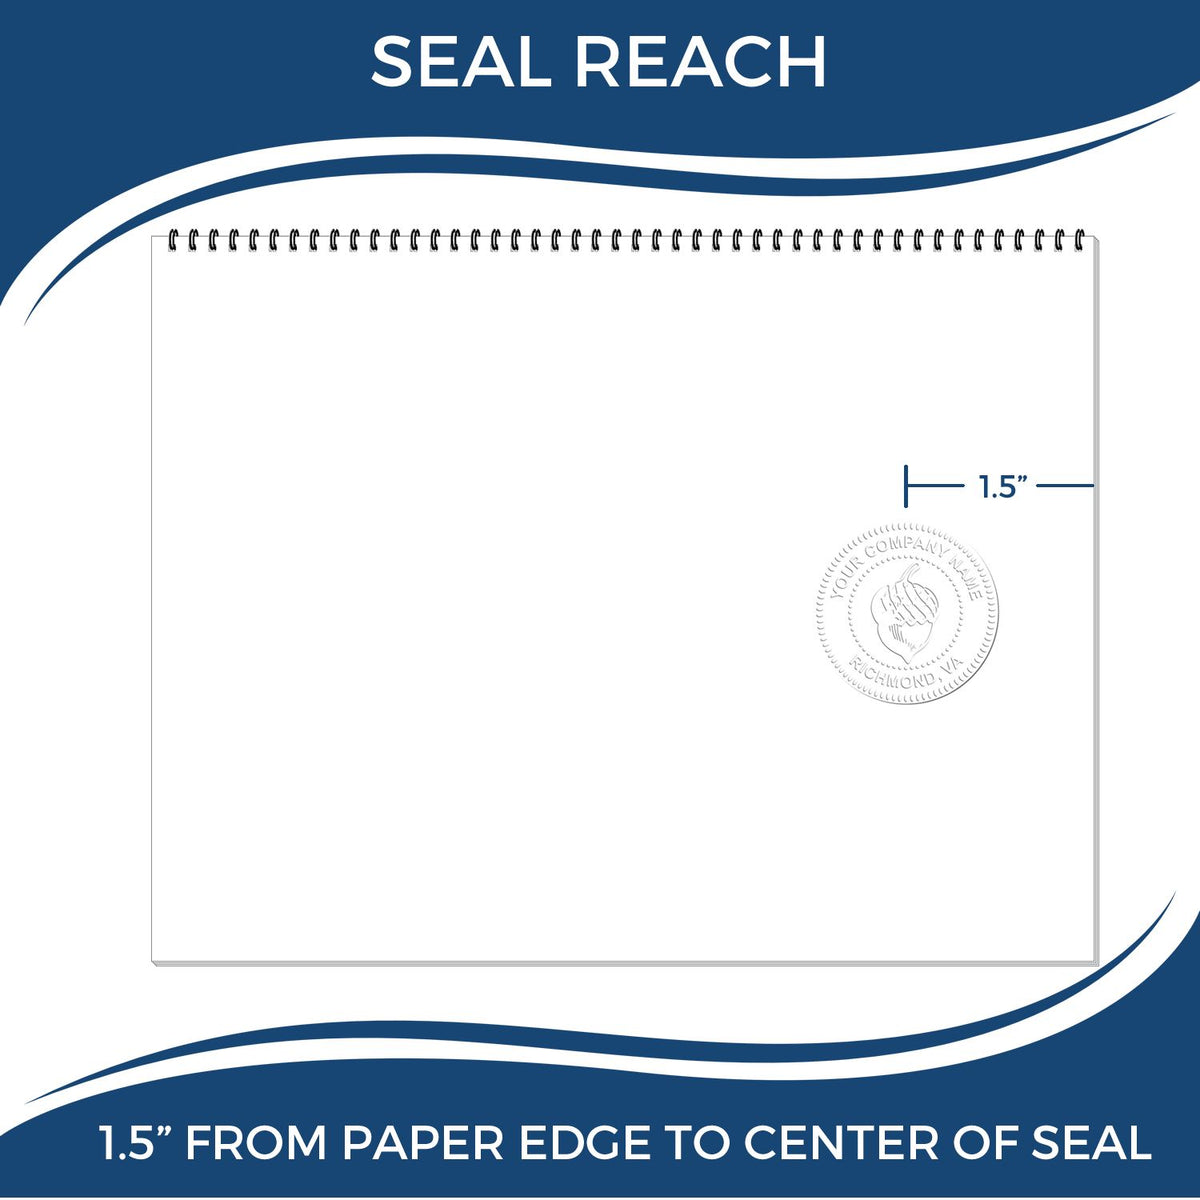 An infographic showing the seal reach which is represented by a ruler and a miniature seal image of the South Dakota Geologist Desk Seal